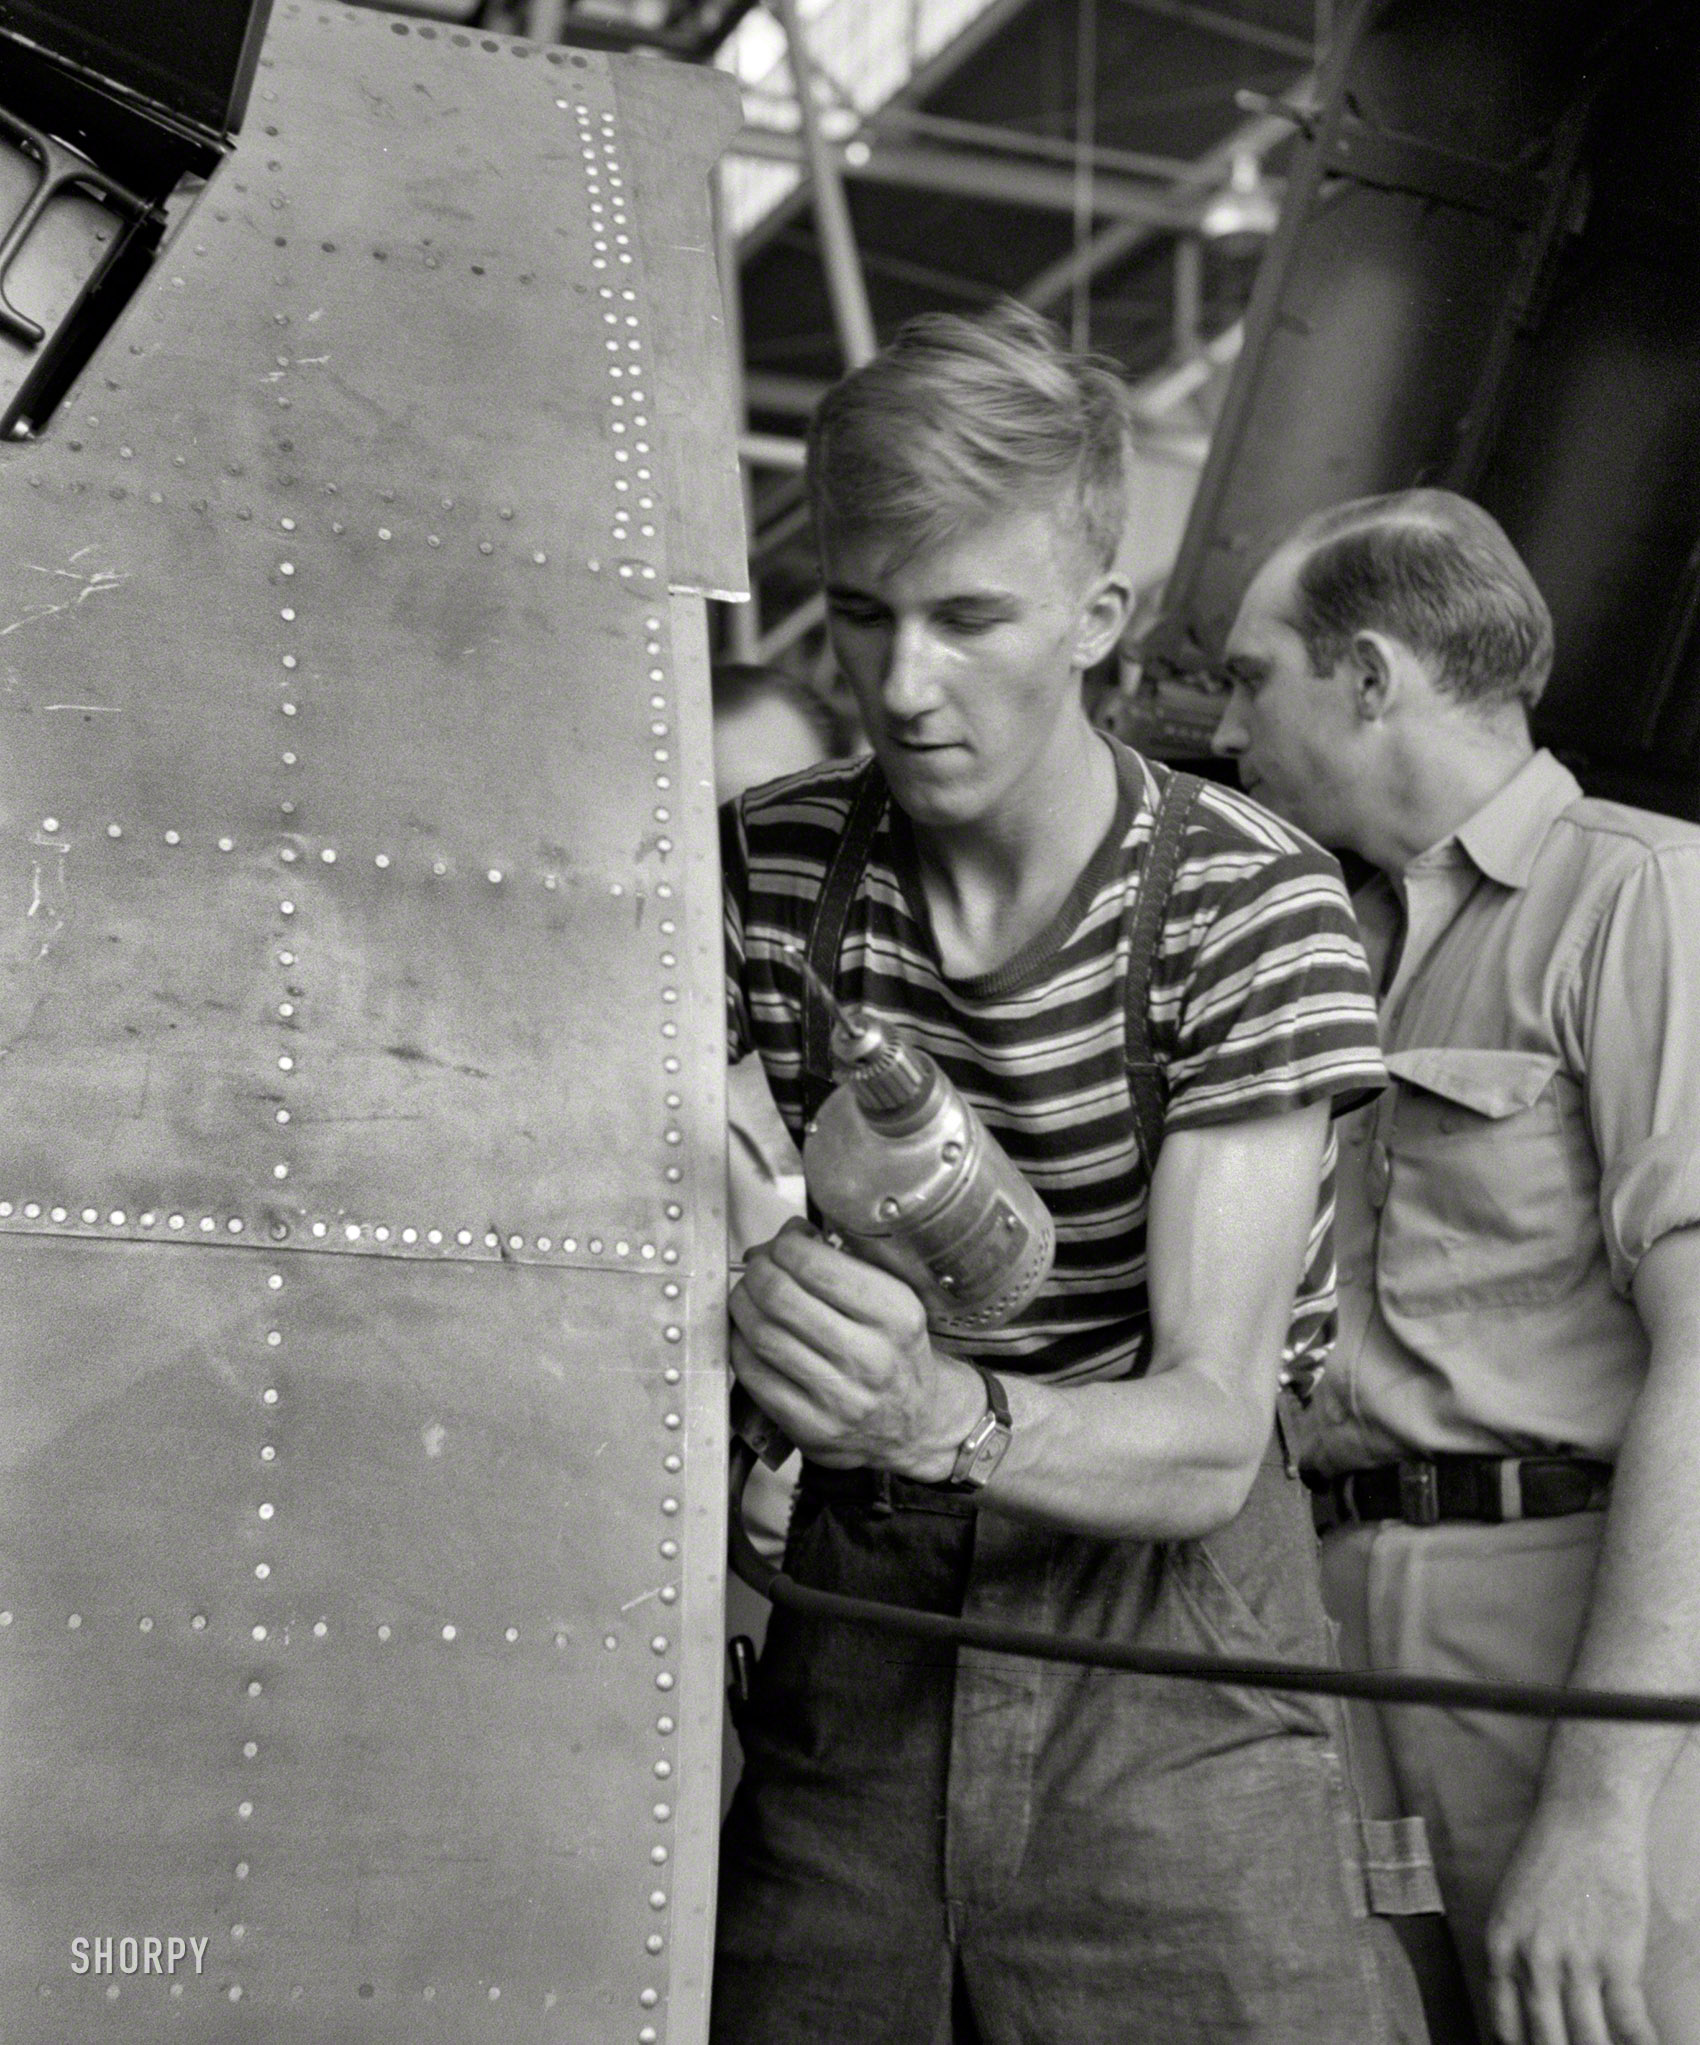 August 1942. "Vultee Aircraft Co., Nashville. Using an electric drill on a fuselage in a sub-assembly section." Another boy putting an airplane together during WW2. Photo by Jack Delano for the Office of War Information. View full size.